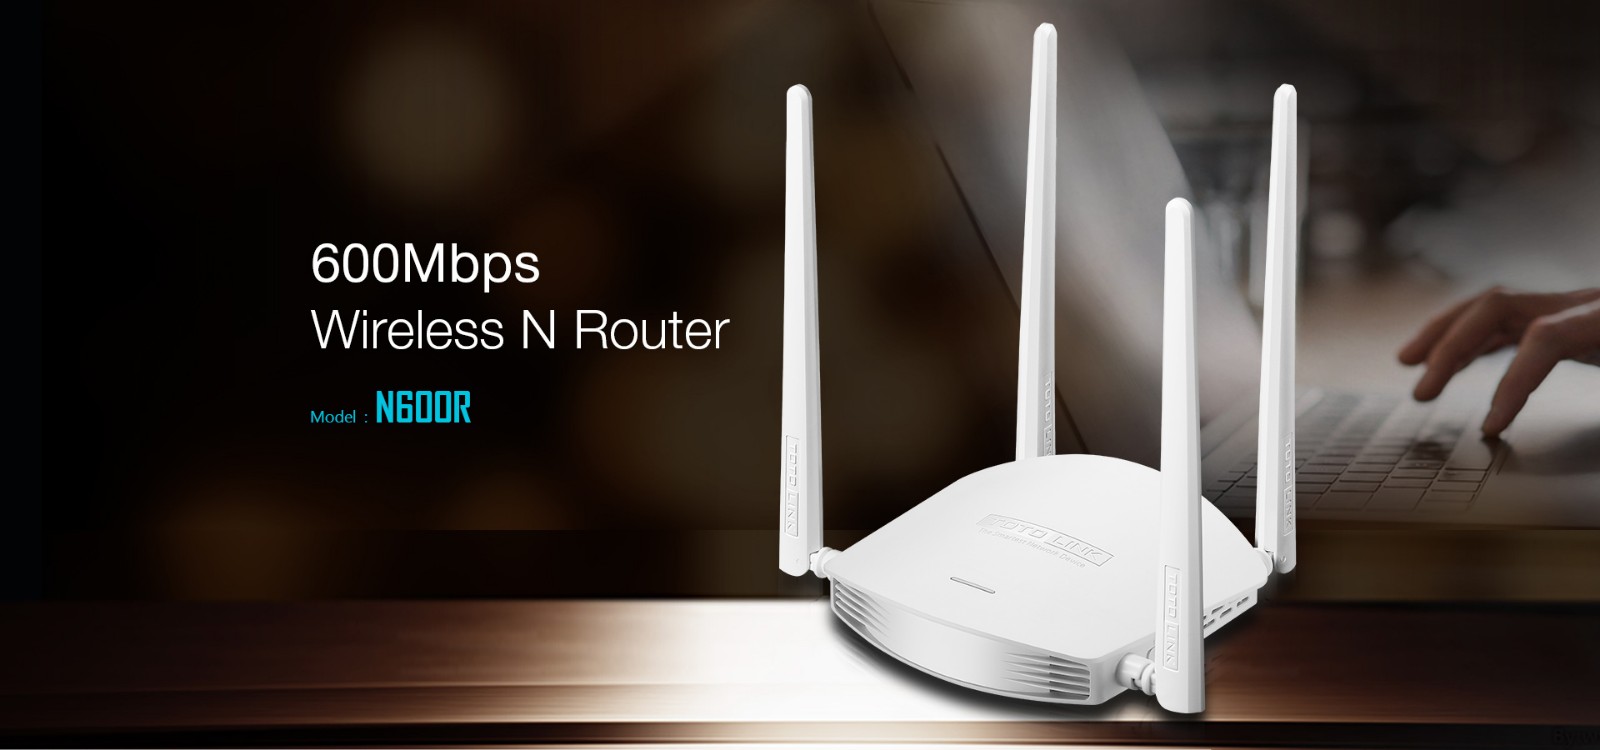 TOTOLINK-600Mbps-Wireless-N-Router-WiFi-Router-Easy-Setup-24GHz-for-Online-Gaming-HD-Streaming-1665736